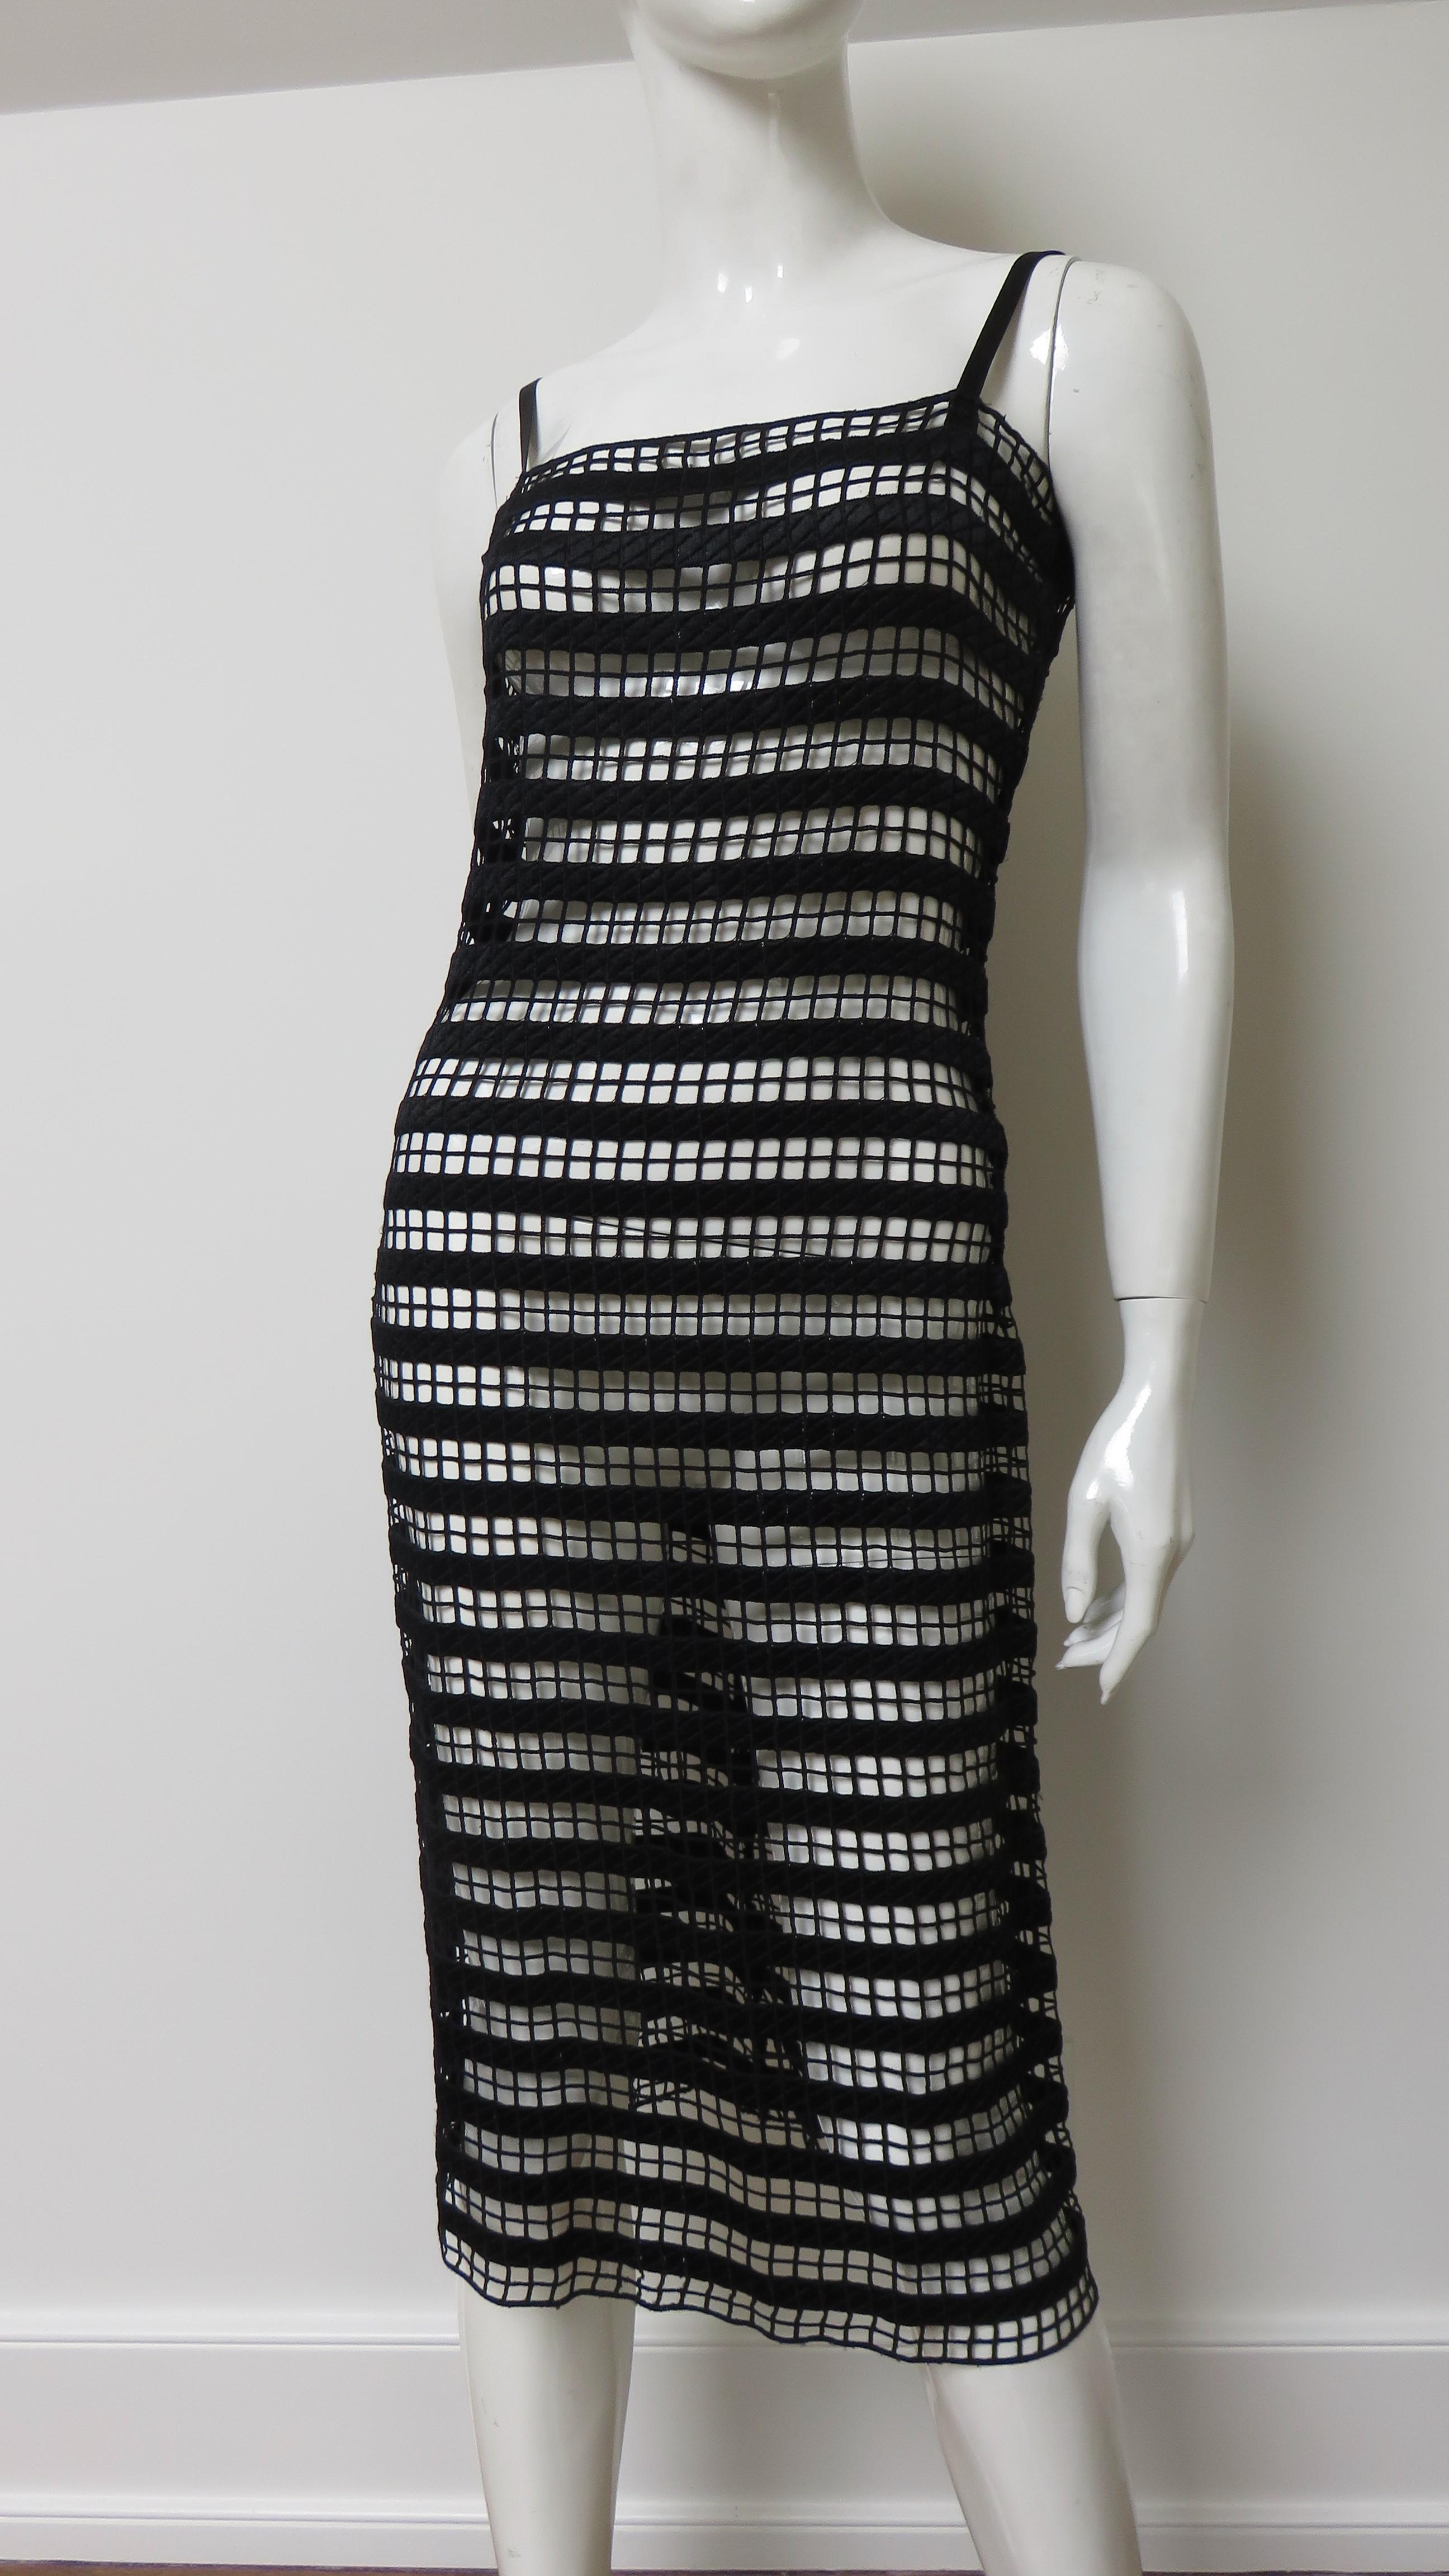 A stunning black silk dress in a linear geometric pattern by Collette Dinnigan.  It is a slip style dress with black straps and rows of horizontal lines joined by rows of faggoting or decorative stitching skimming the body to the hem. Very